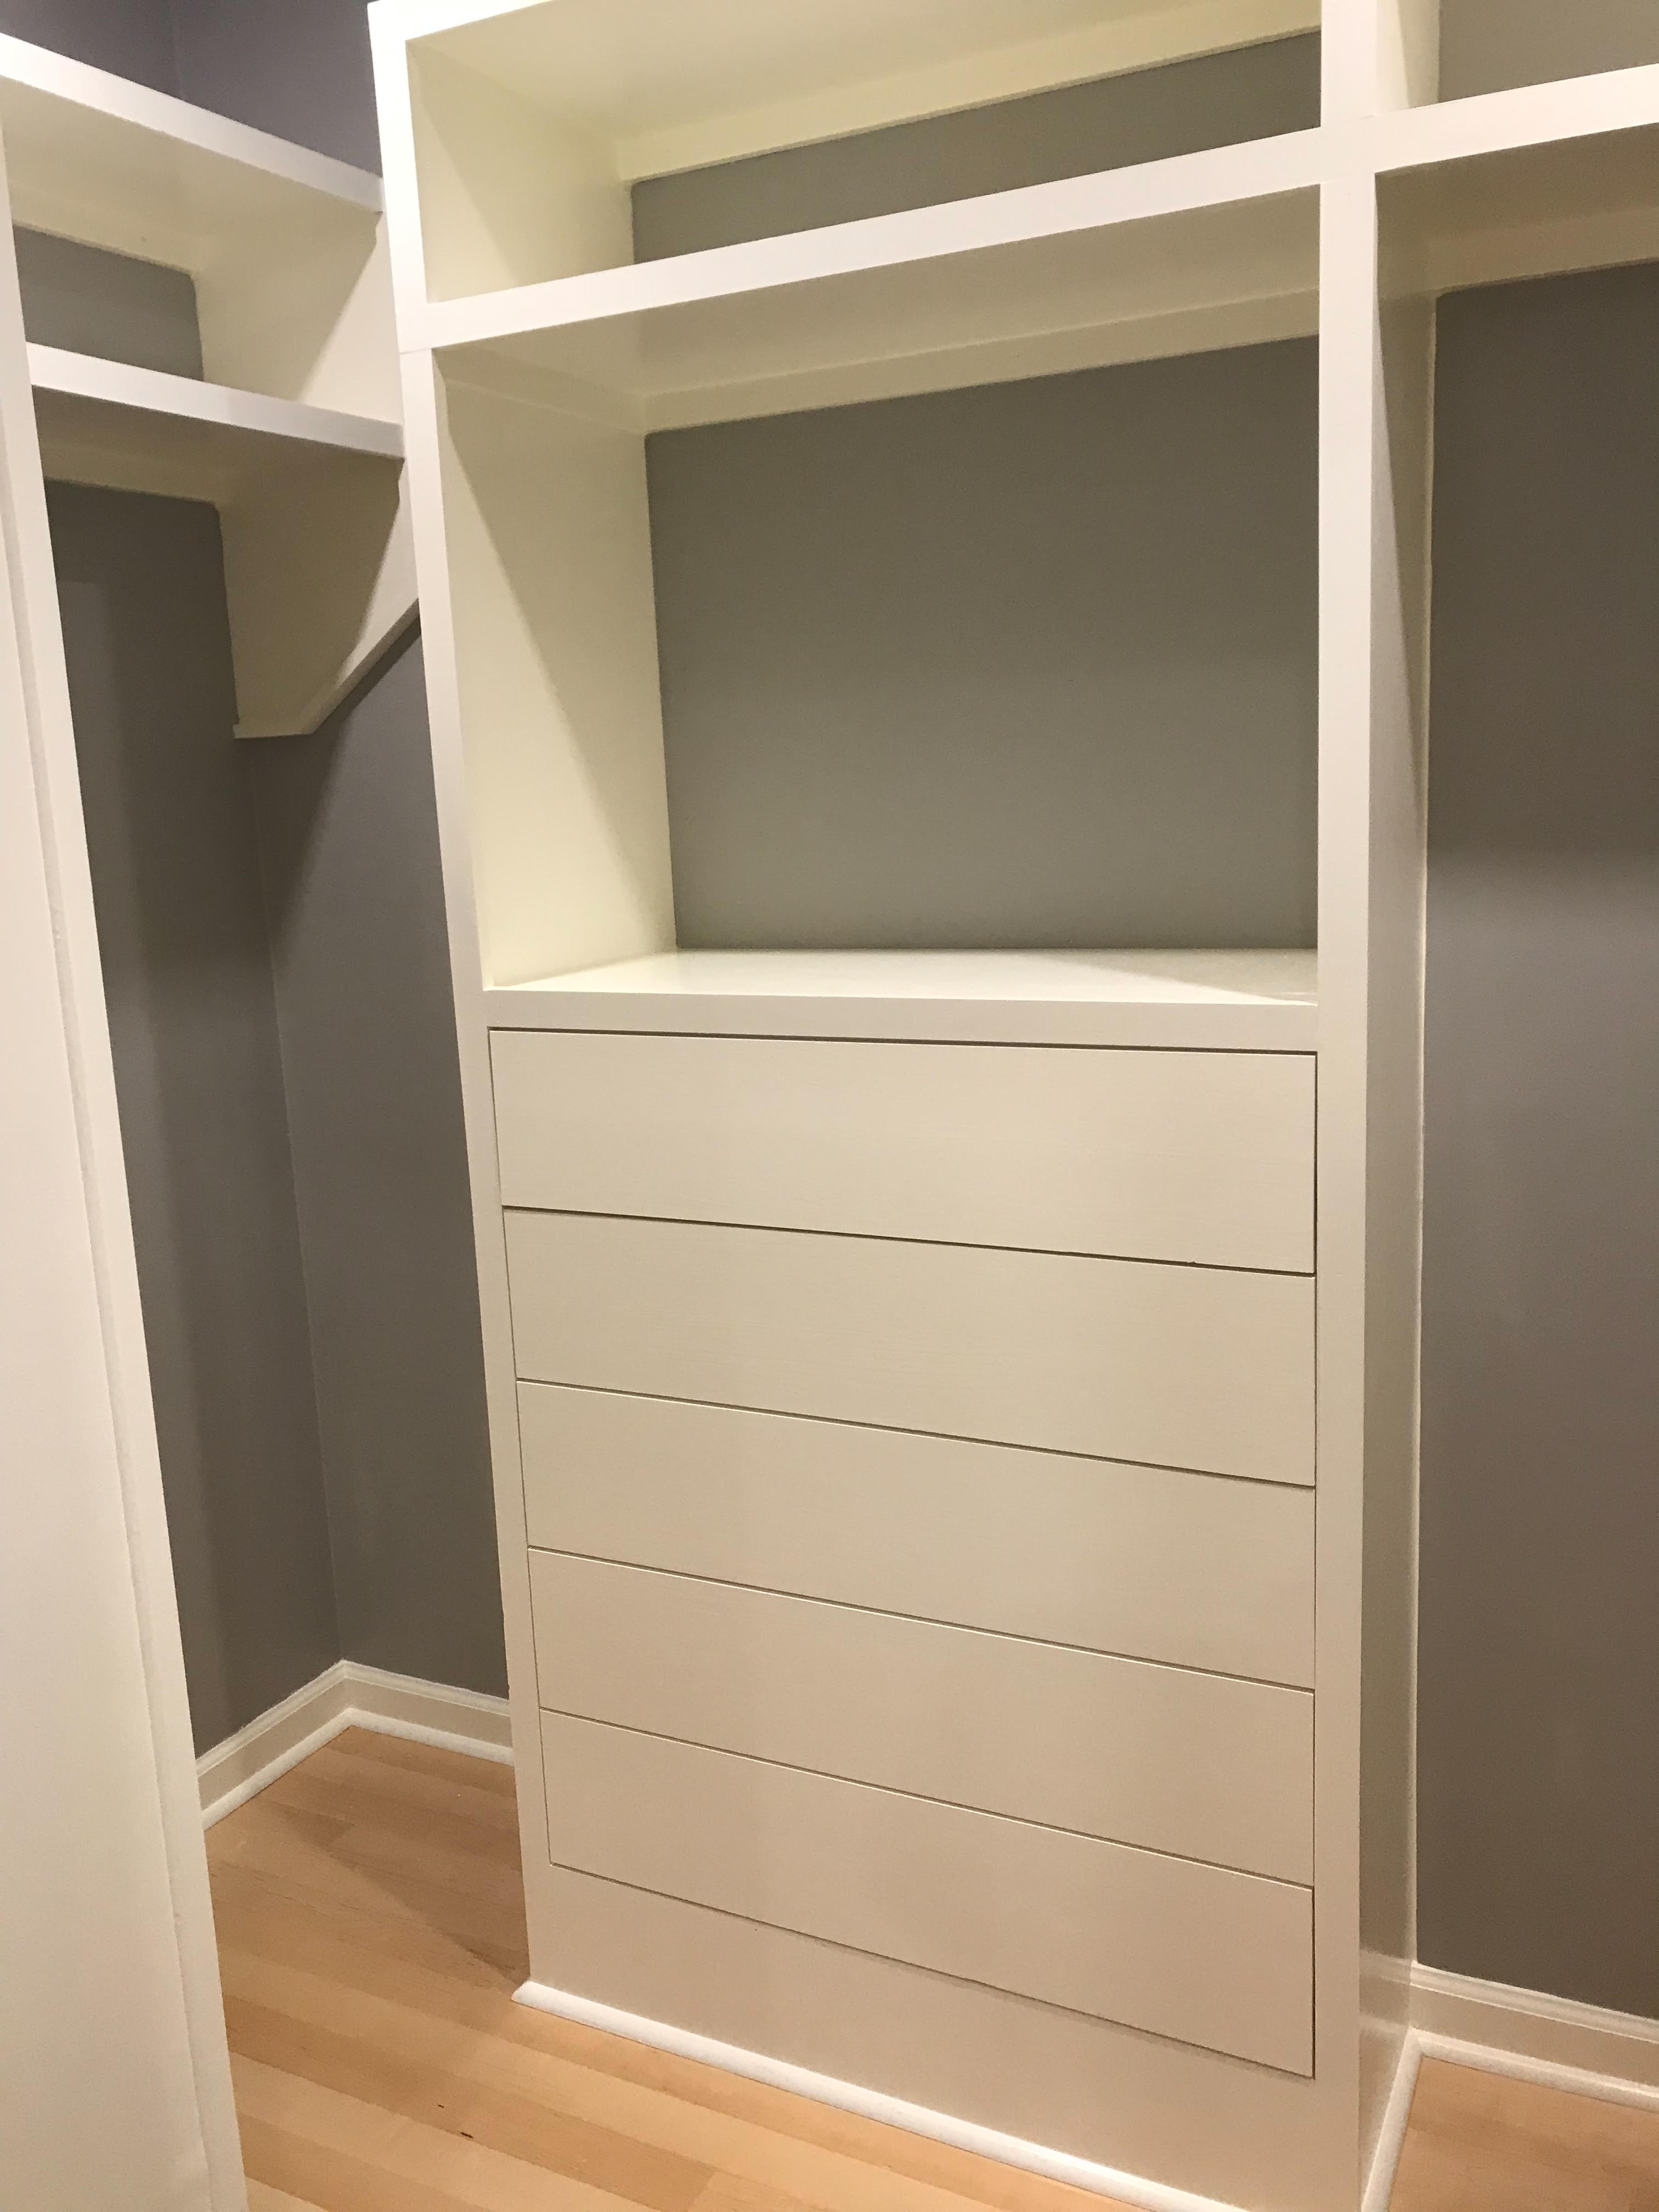 Modern closet space for clothes